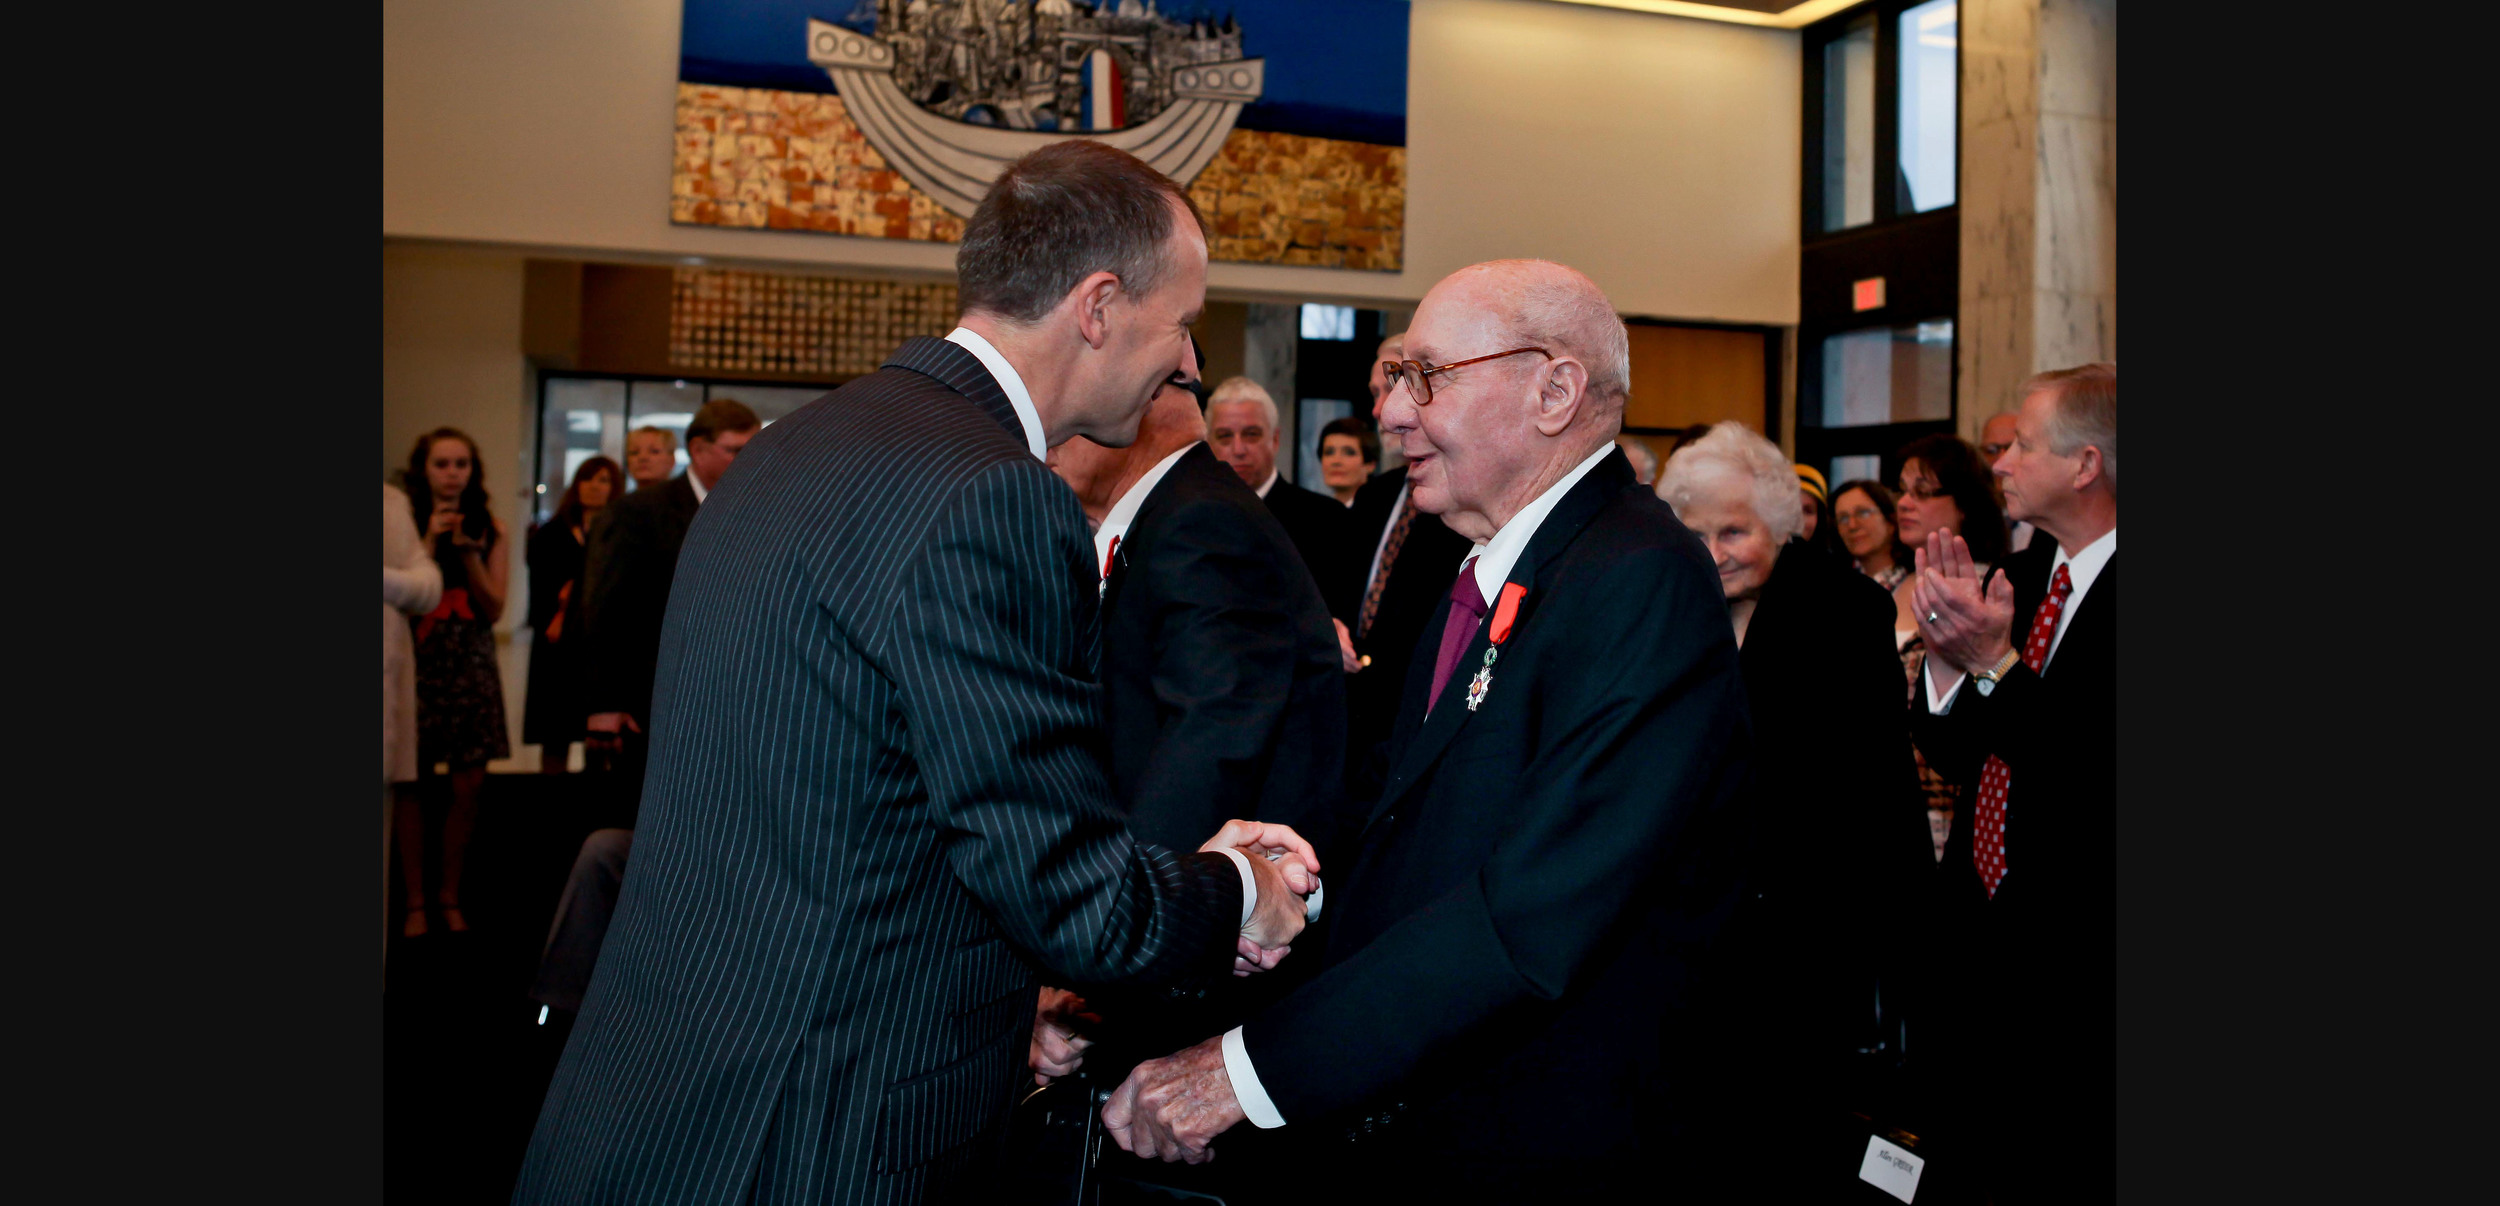 Washington Consul General Olivier Serot Alméras honors WWII veterans at the Embassy of France